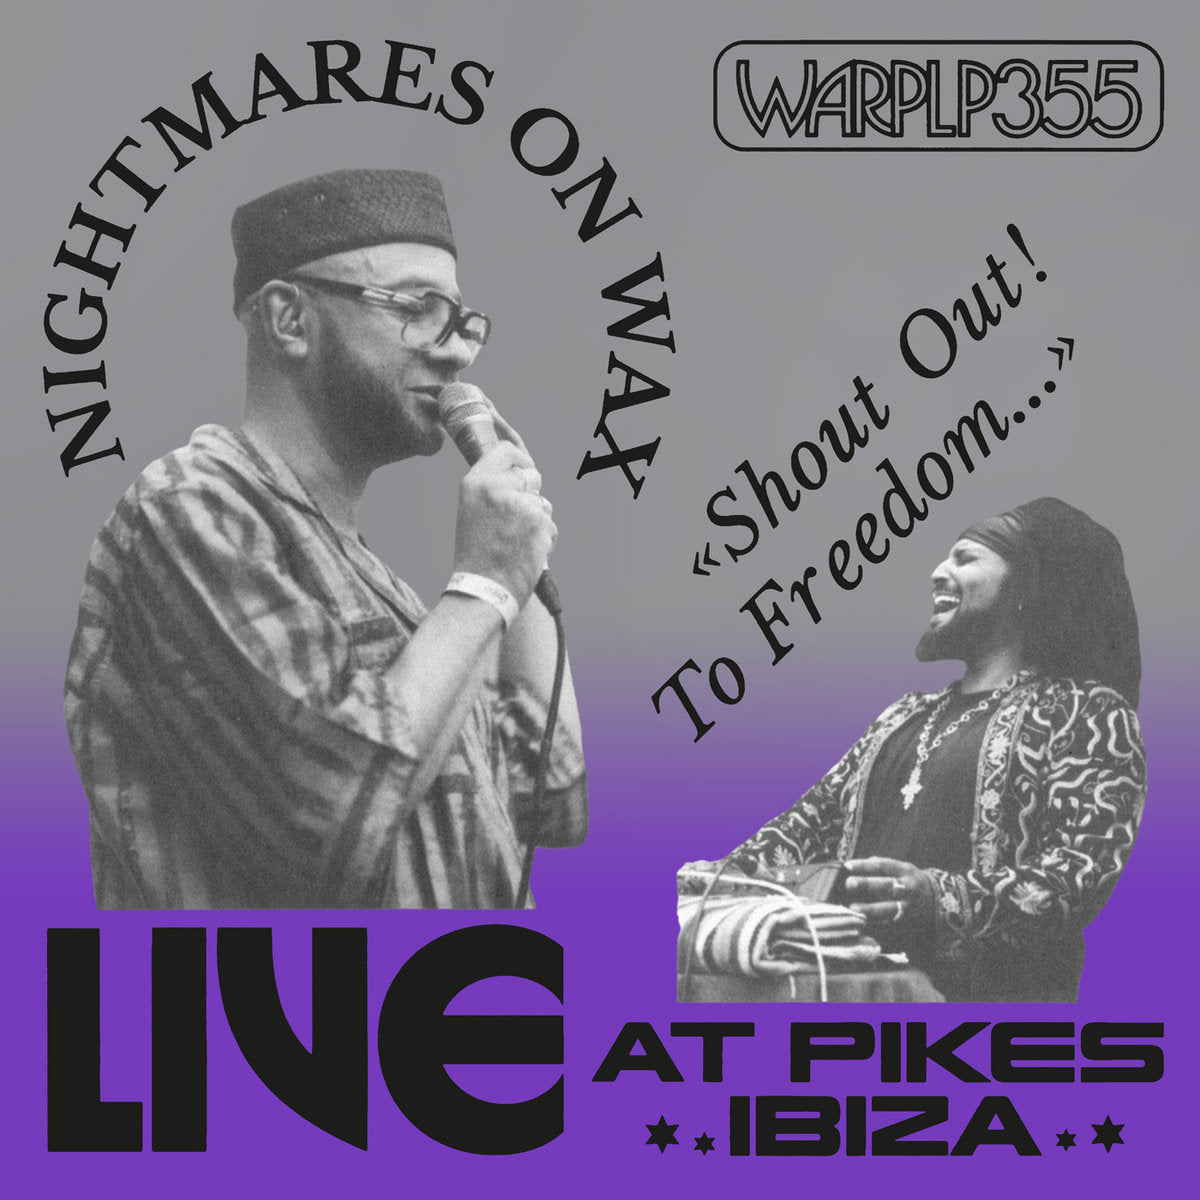 Nightmares On Wax - Shout Out! To Freedom... (Live at Pikes Ibiza)